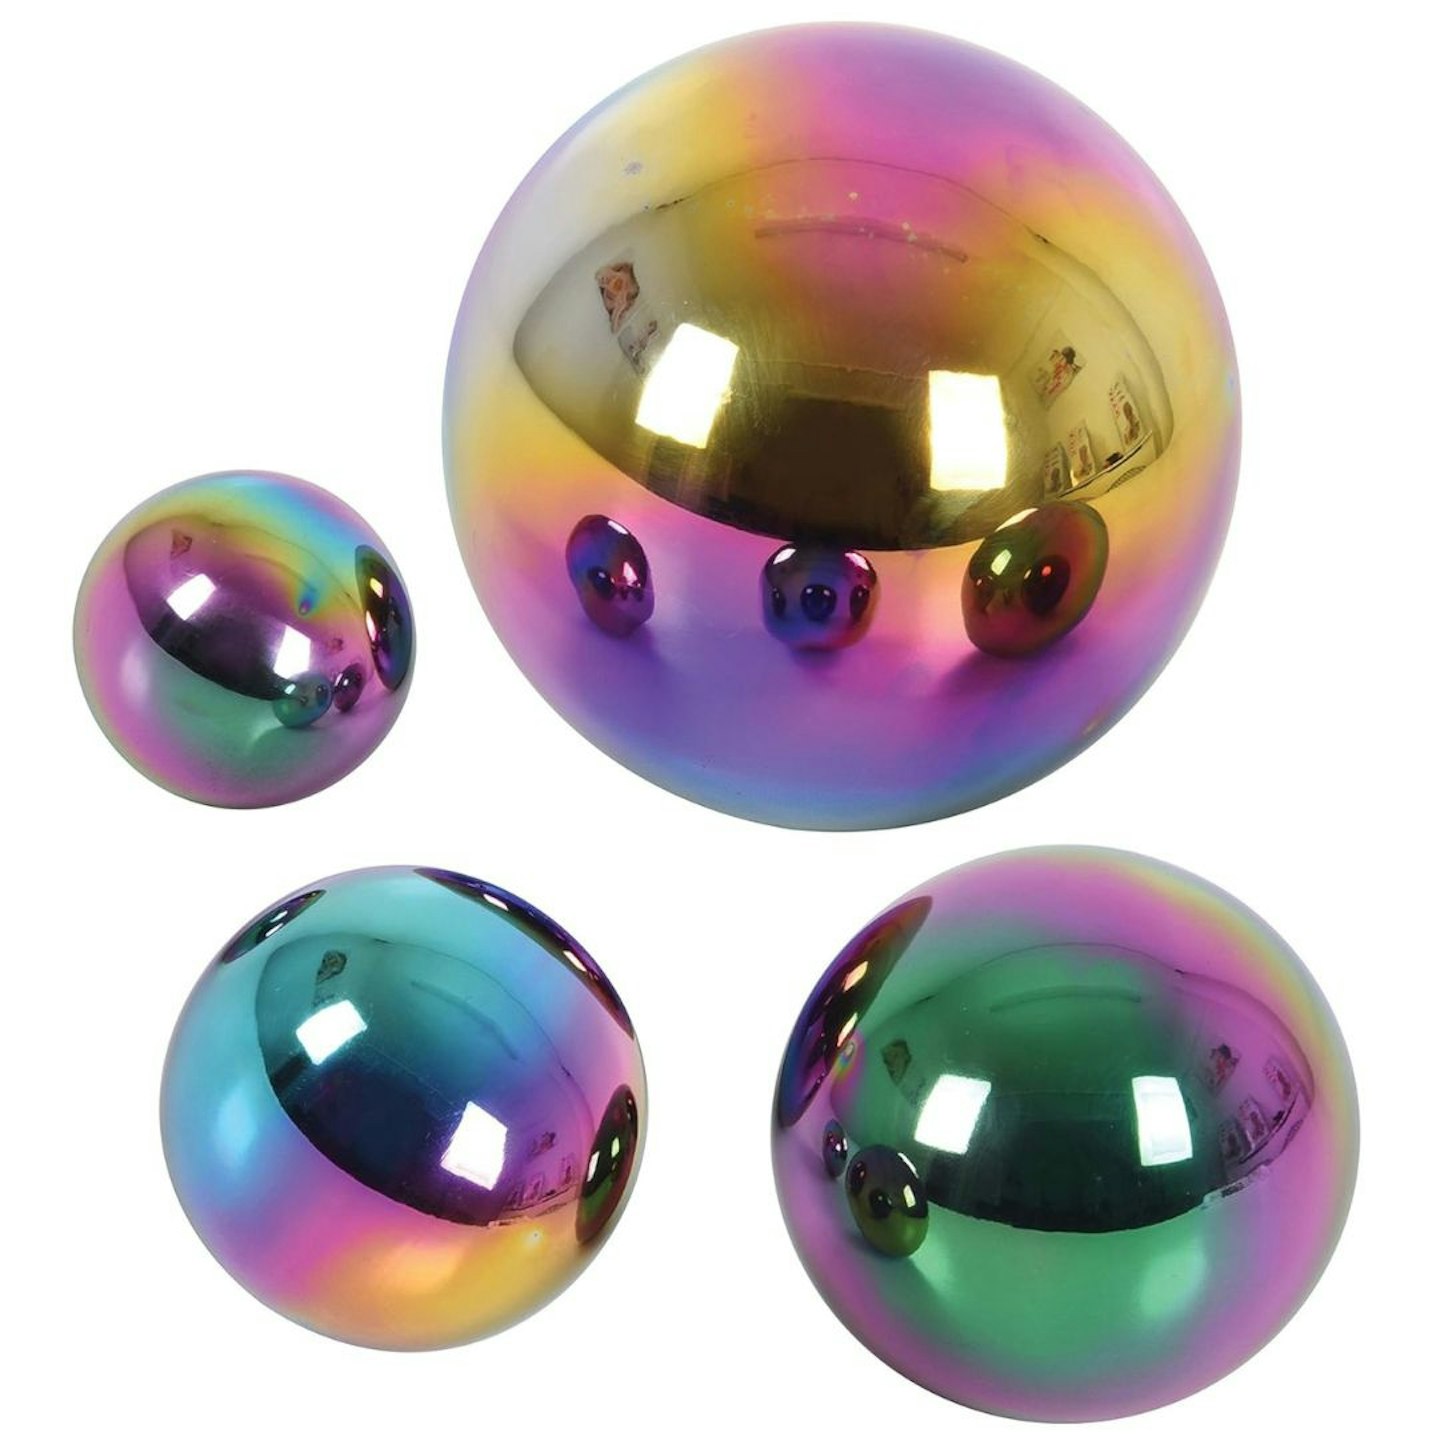 The Best Toys For One-Year-Olds: TickiT 72221 Sensory Reflective Colour Burst Balls Set of 4